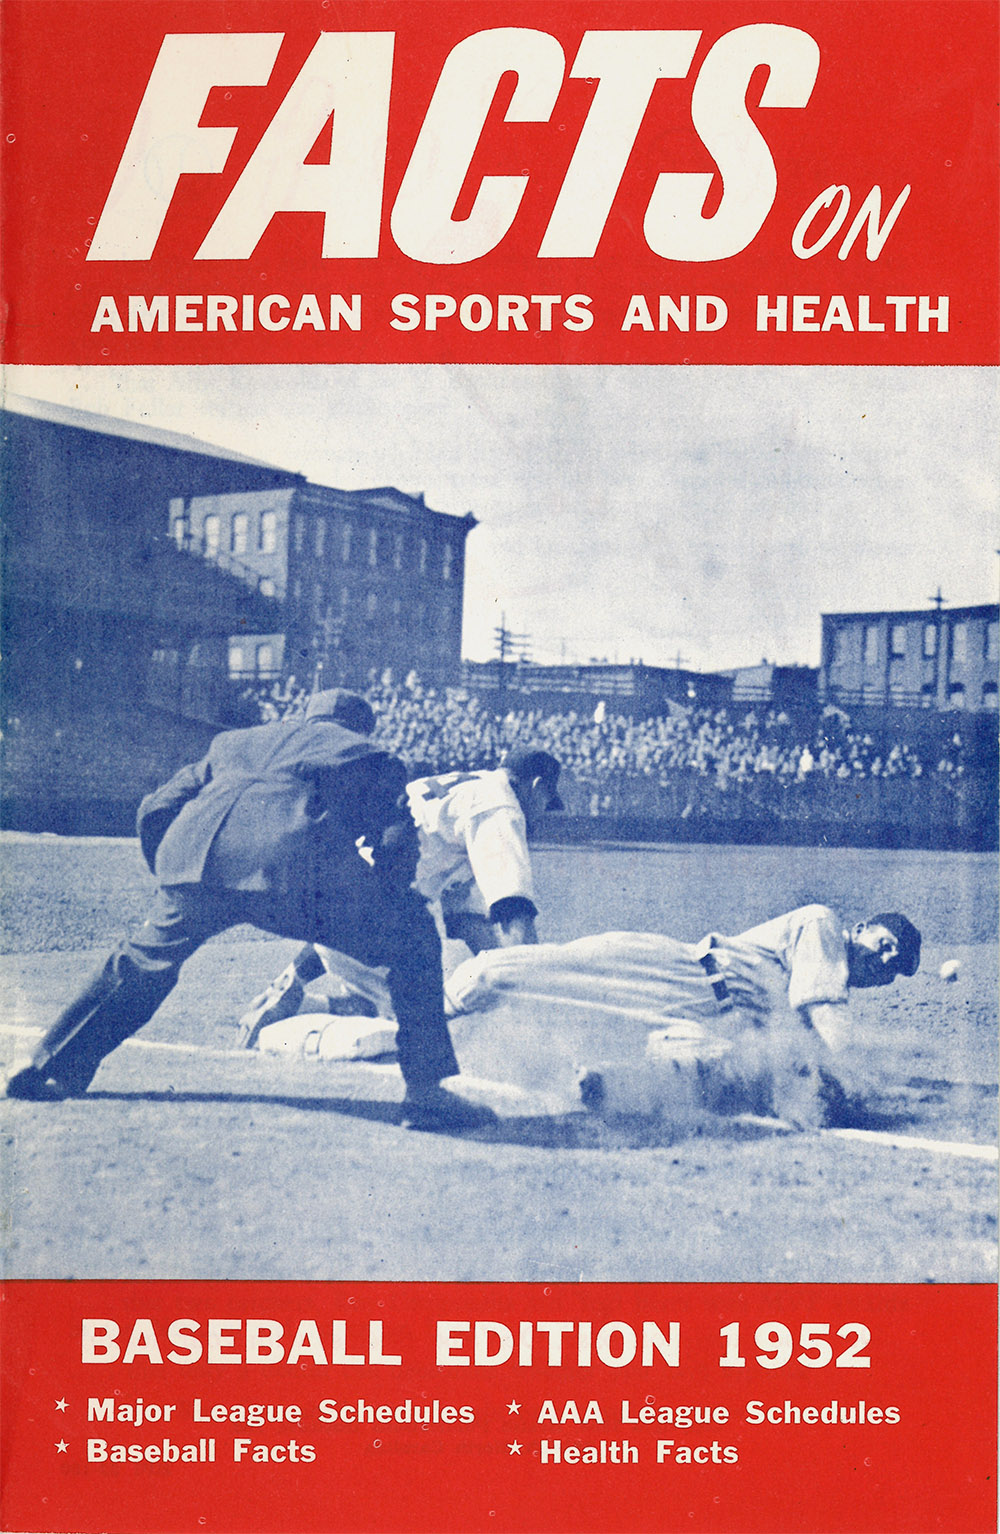 Selected Pages from
Facts on American Sports and Health